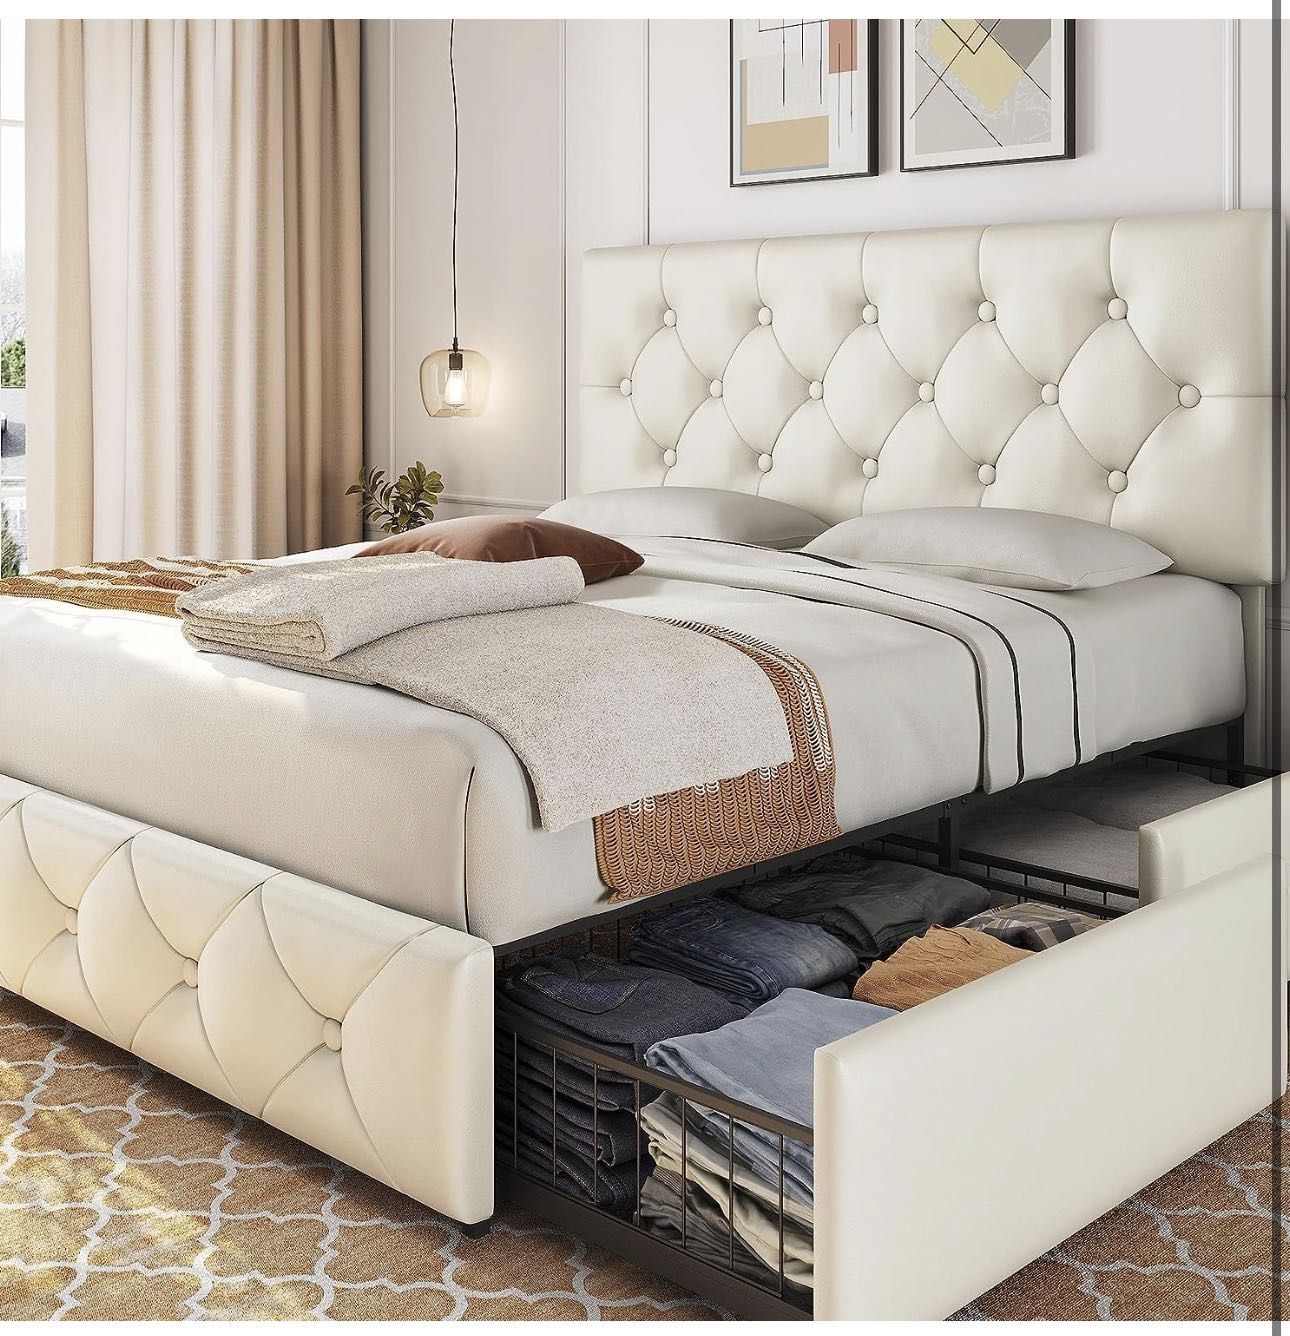 Queen Upholstered Bed Frame with 4 Drawers and Adjustable Headboard, Faux Leather Platform Bed with Mattress Foundation Strong Wooden Slats Support, N